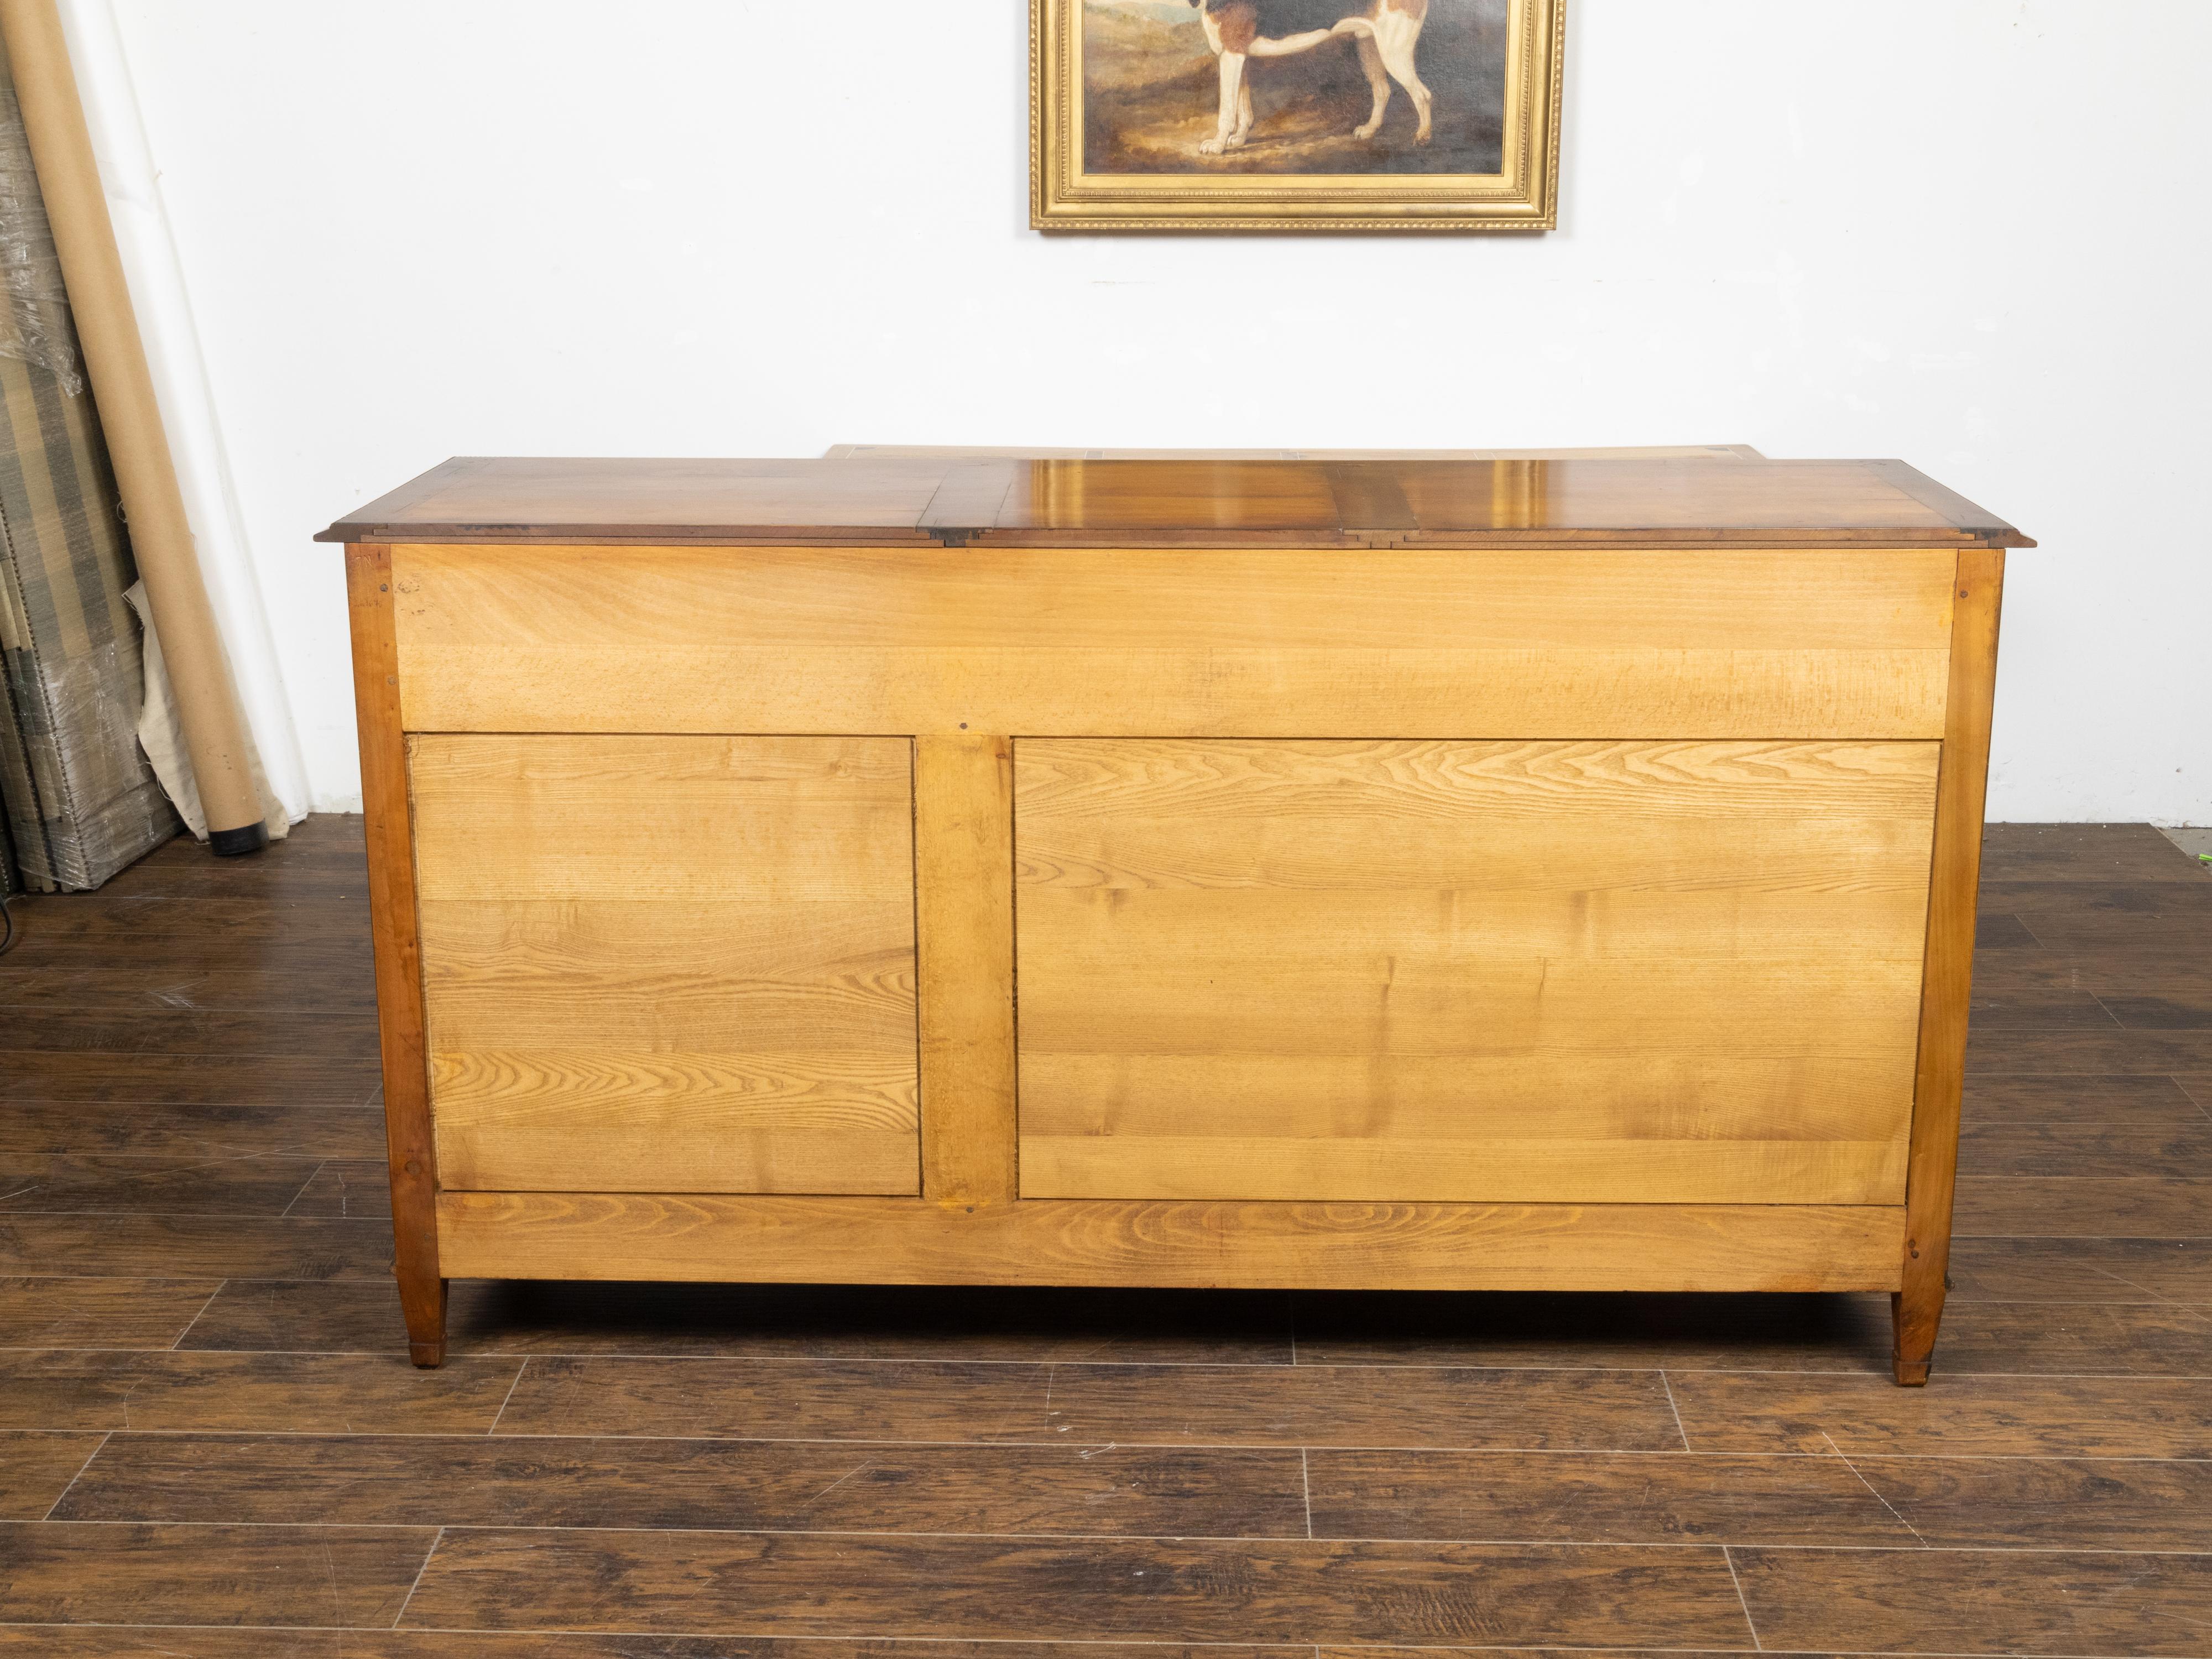 French 1940s Walnut Enfilade with Drawers, Doors, Carved Beads and Diamond Motif For Sale 2